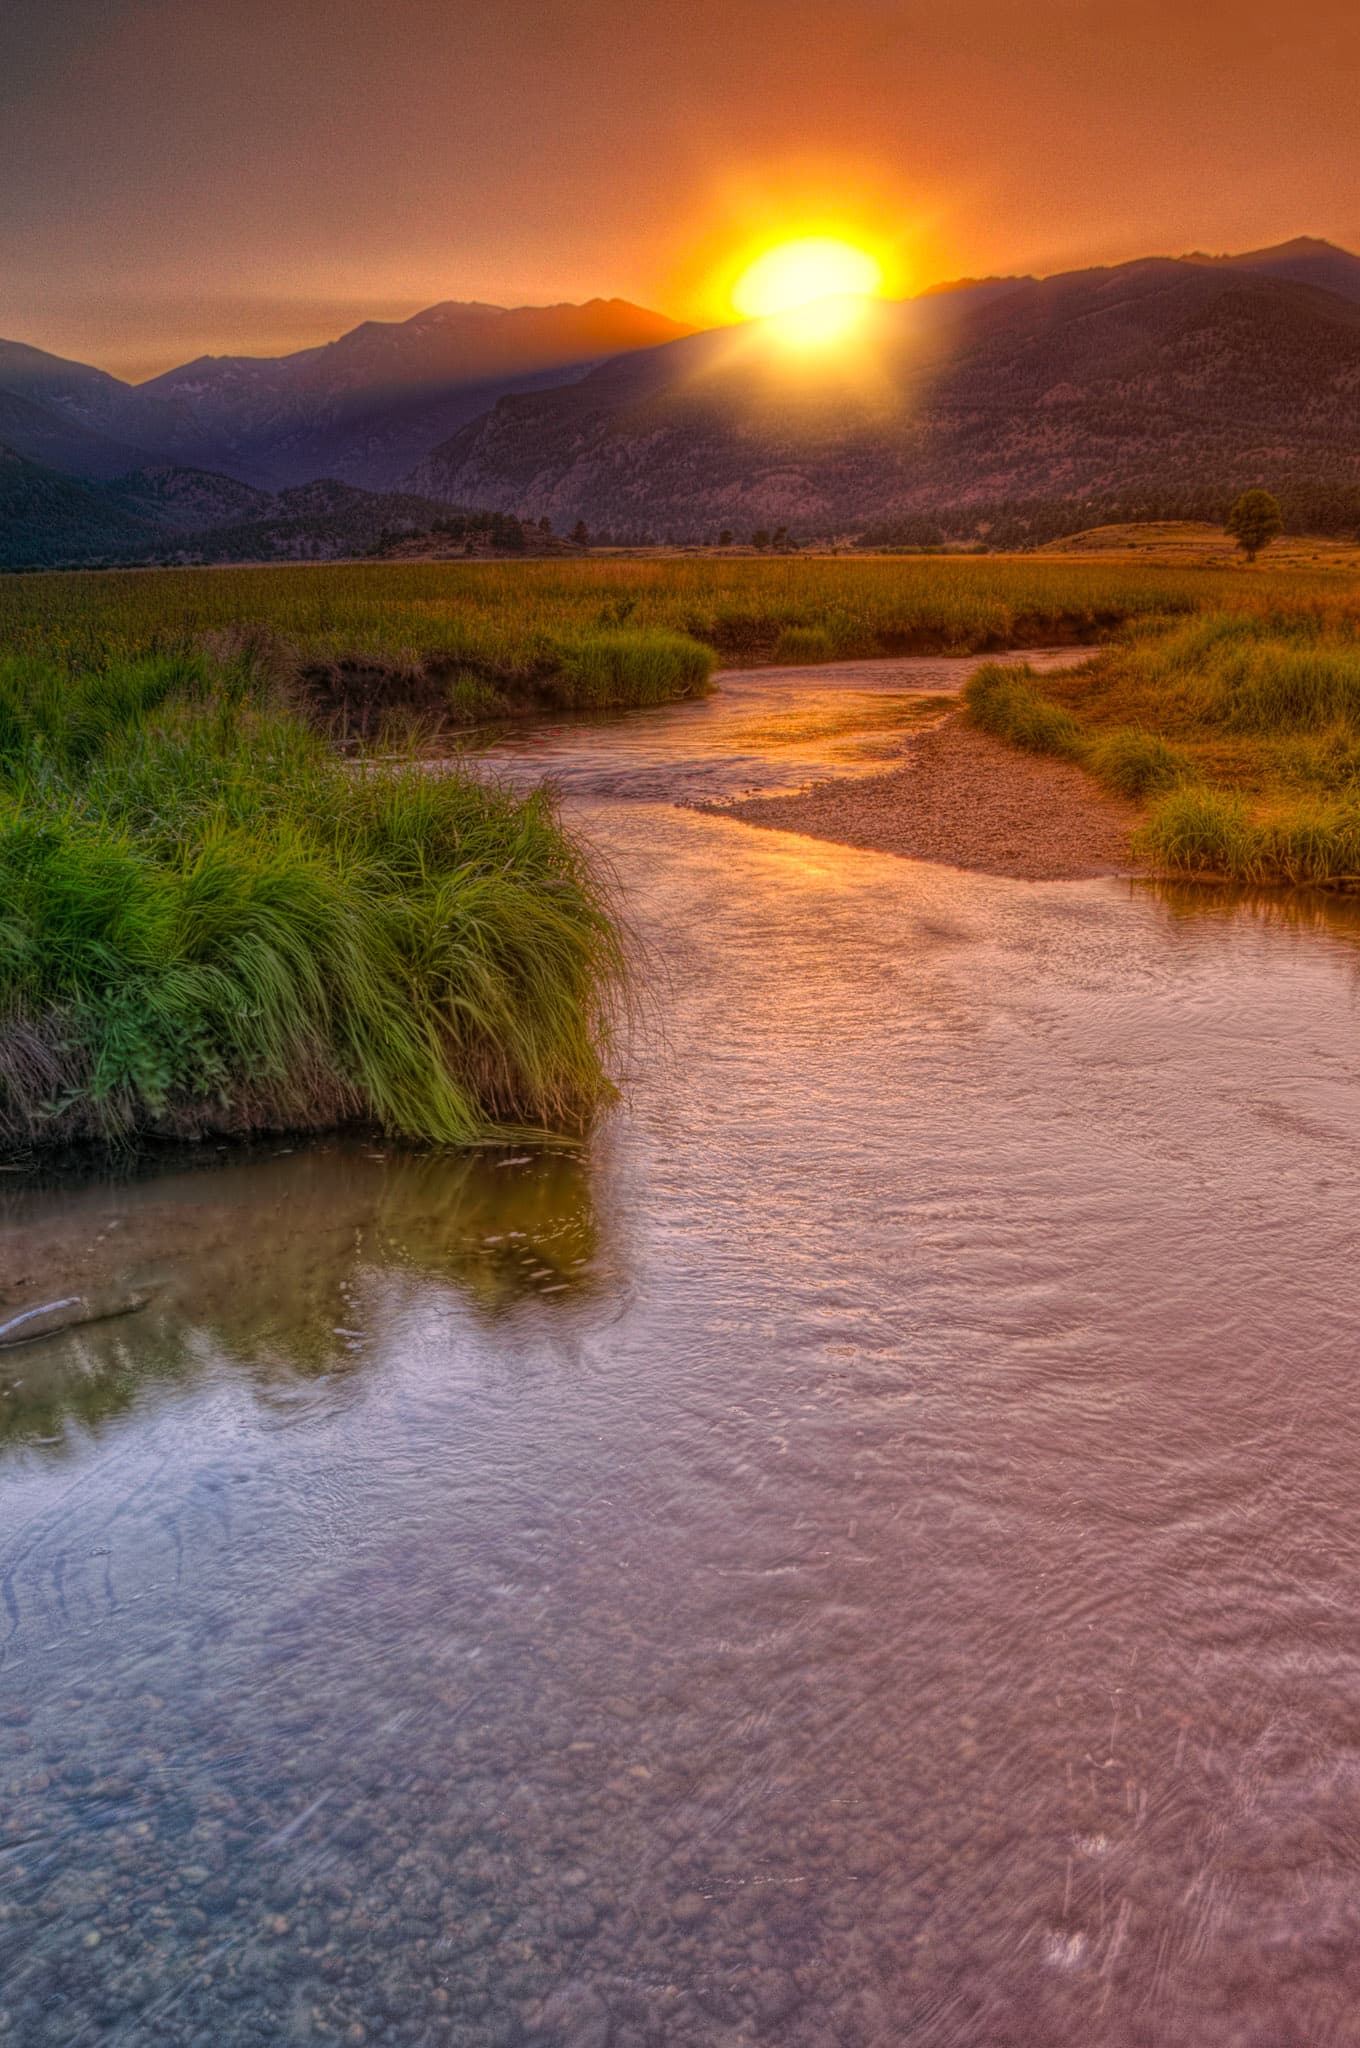 The sun dips behind Beaver Mountain as seen from the edge of Big Thompson River as it meanders through Moraine Park in Rocky Mountain National Park.